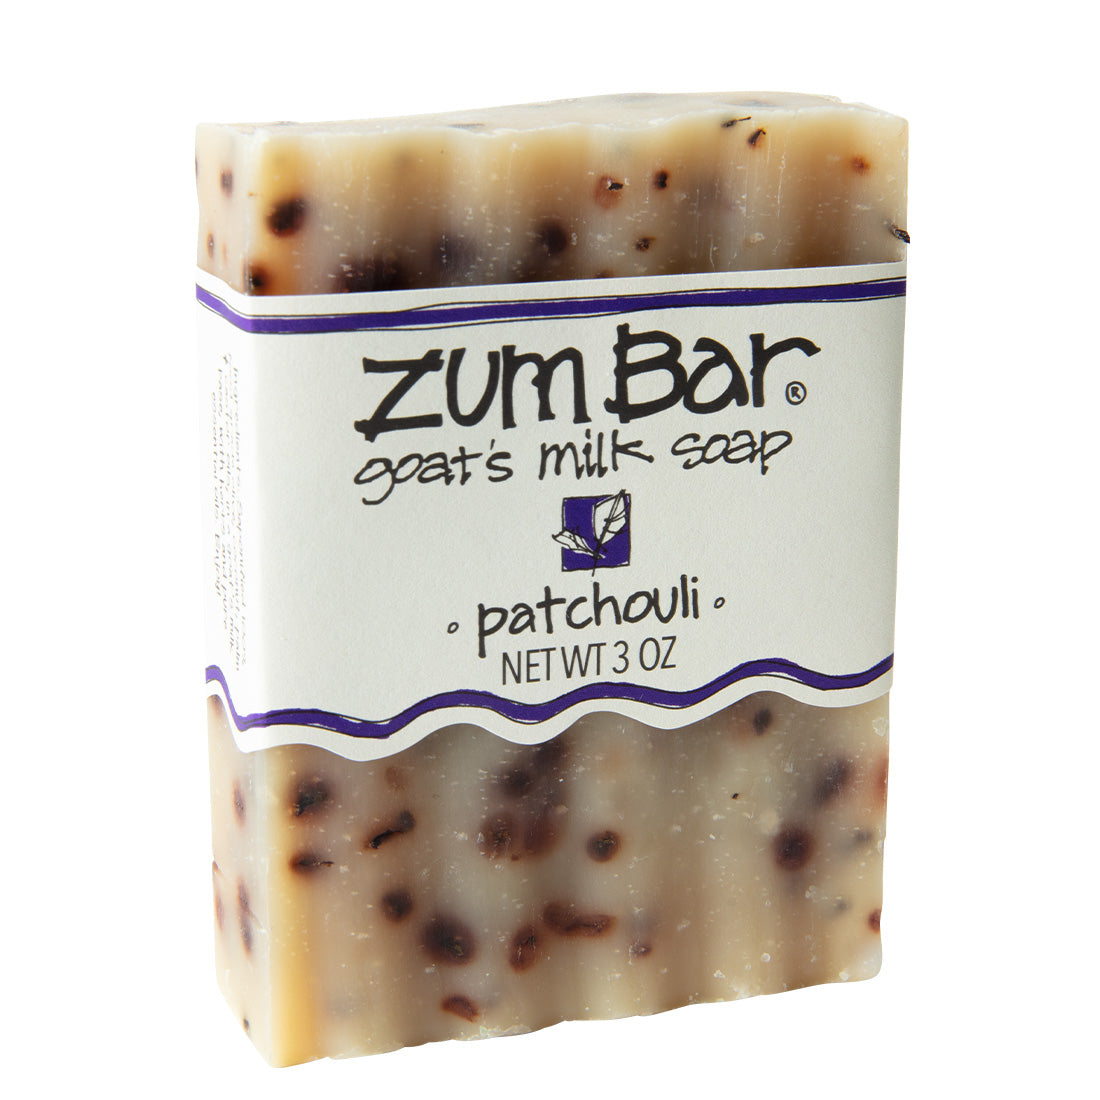 Labeled Patchouli scented Zum Bar Soap with brown speckled coloring